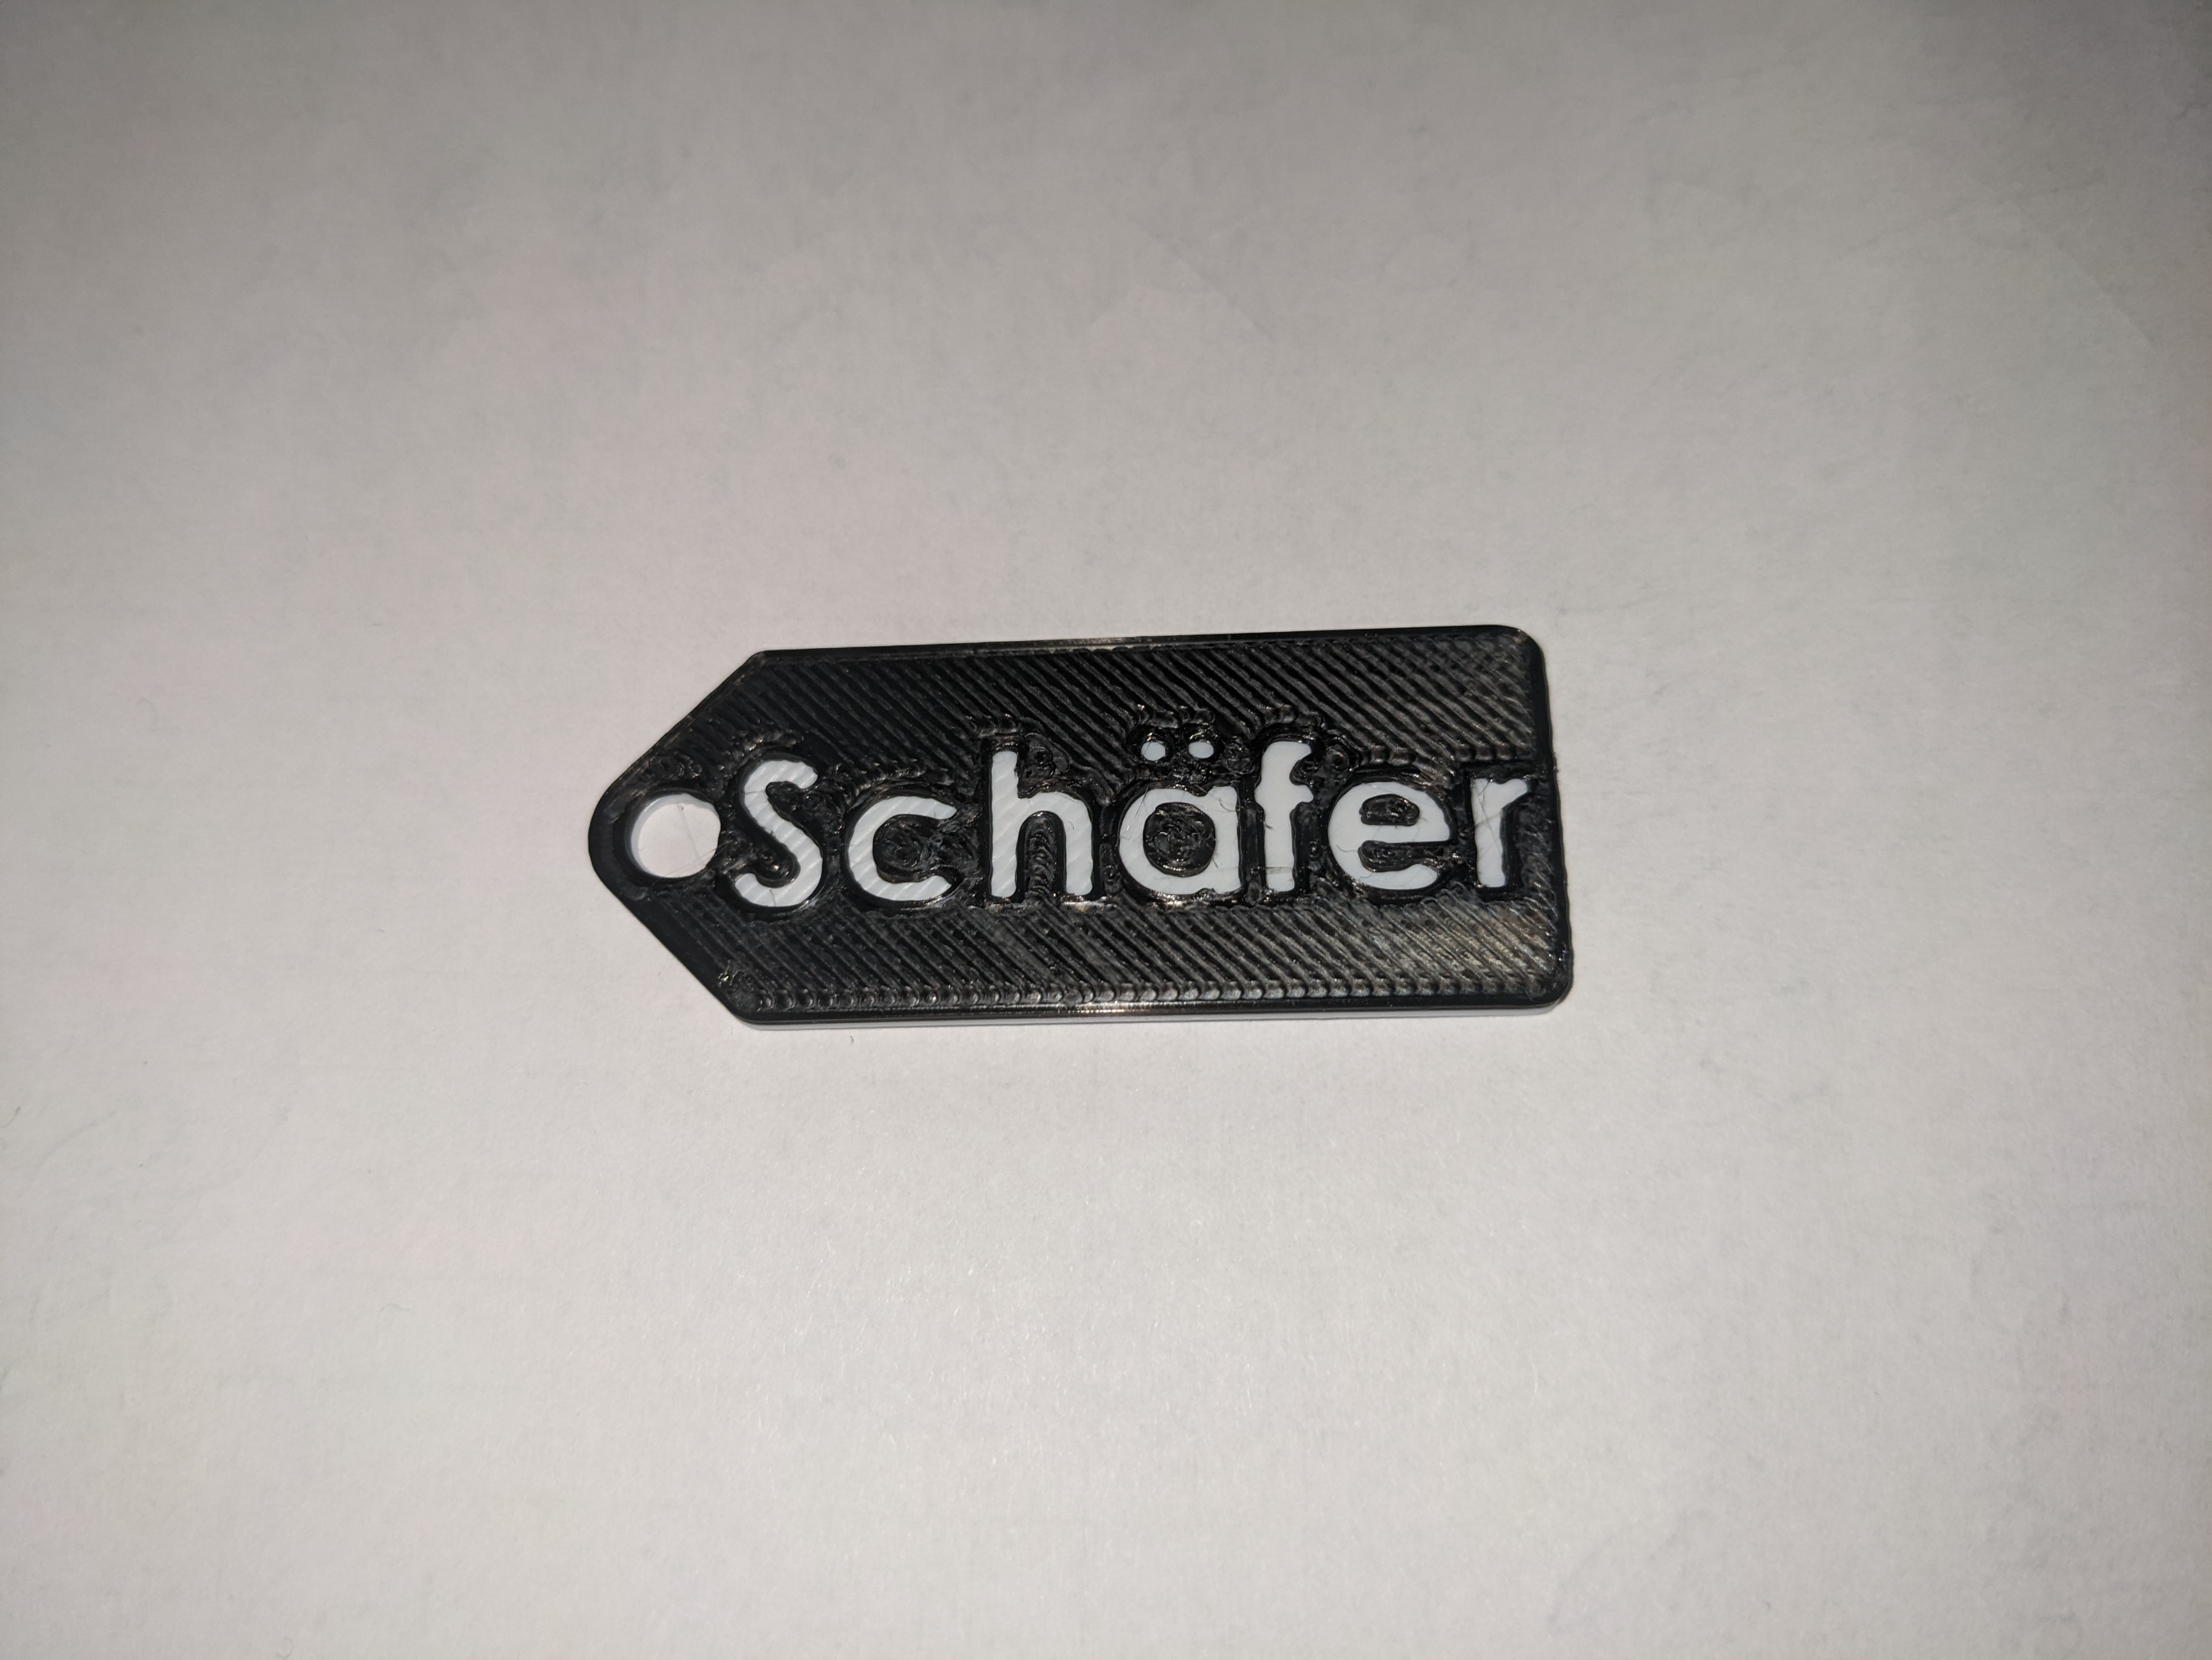 Simple Name-Tags for Keyrings etc. - Solidworks adaptable